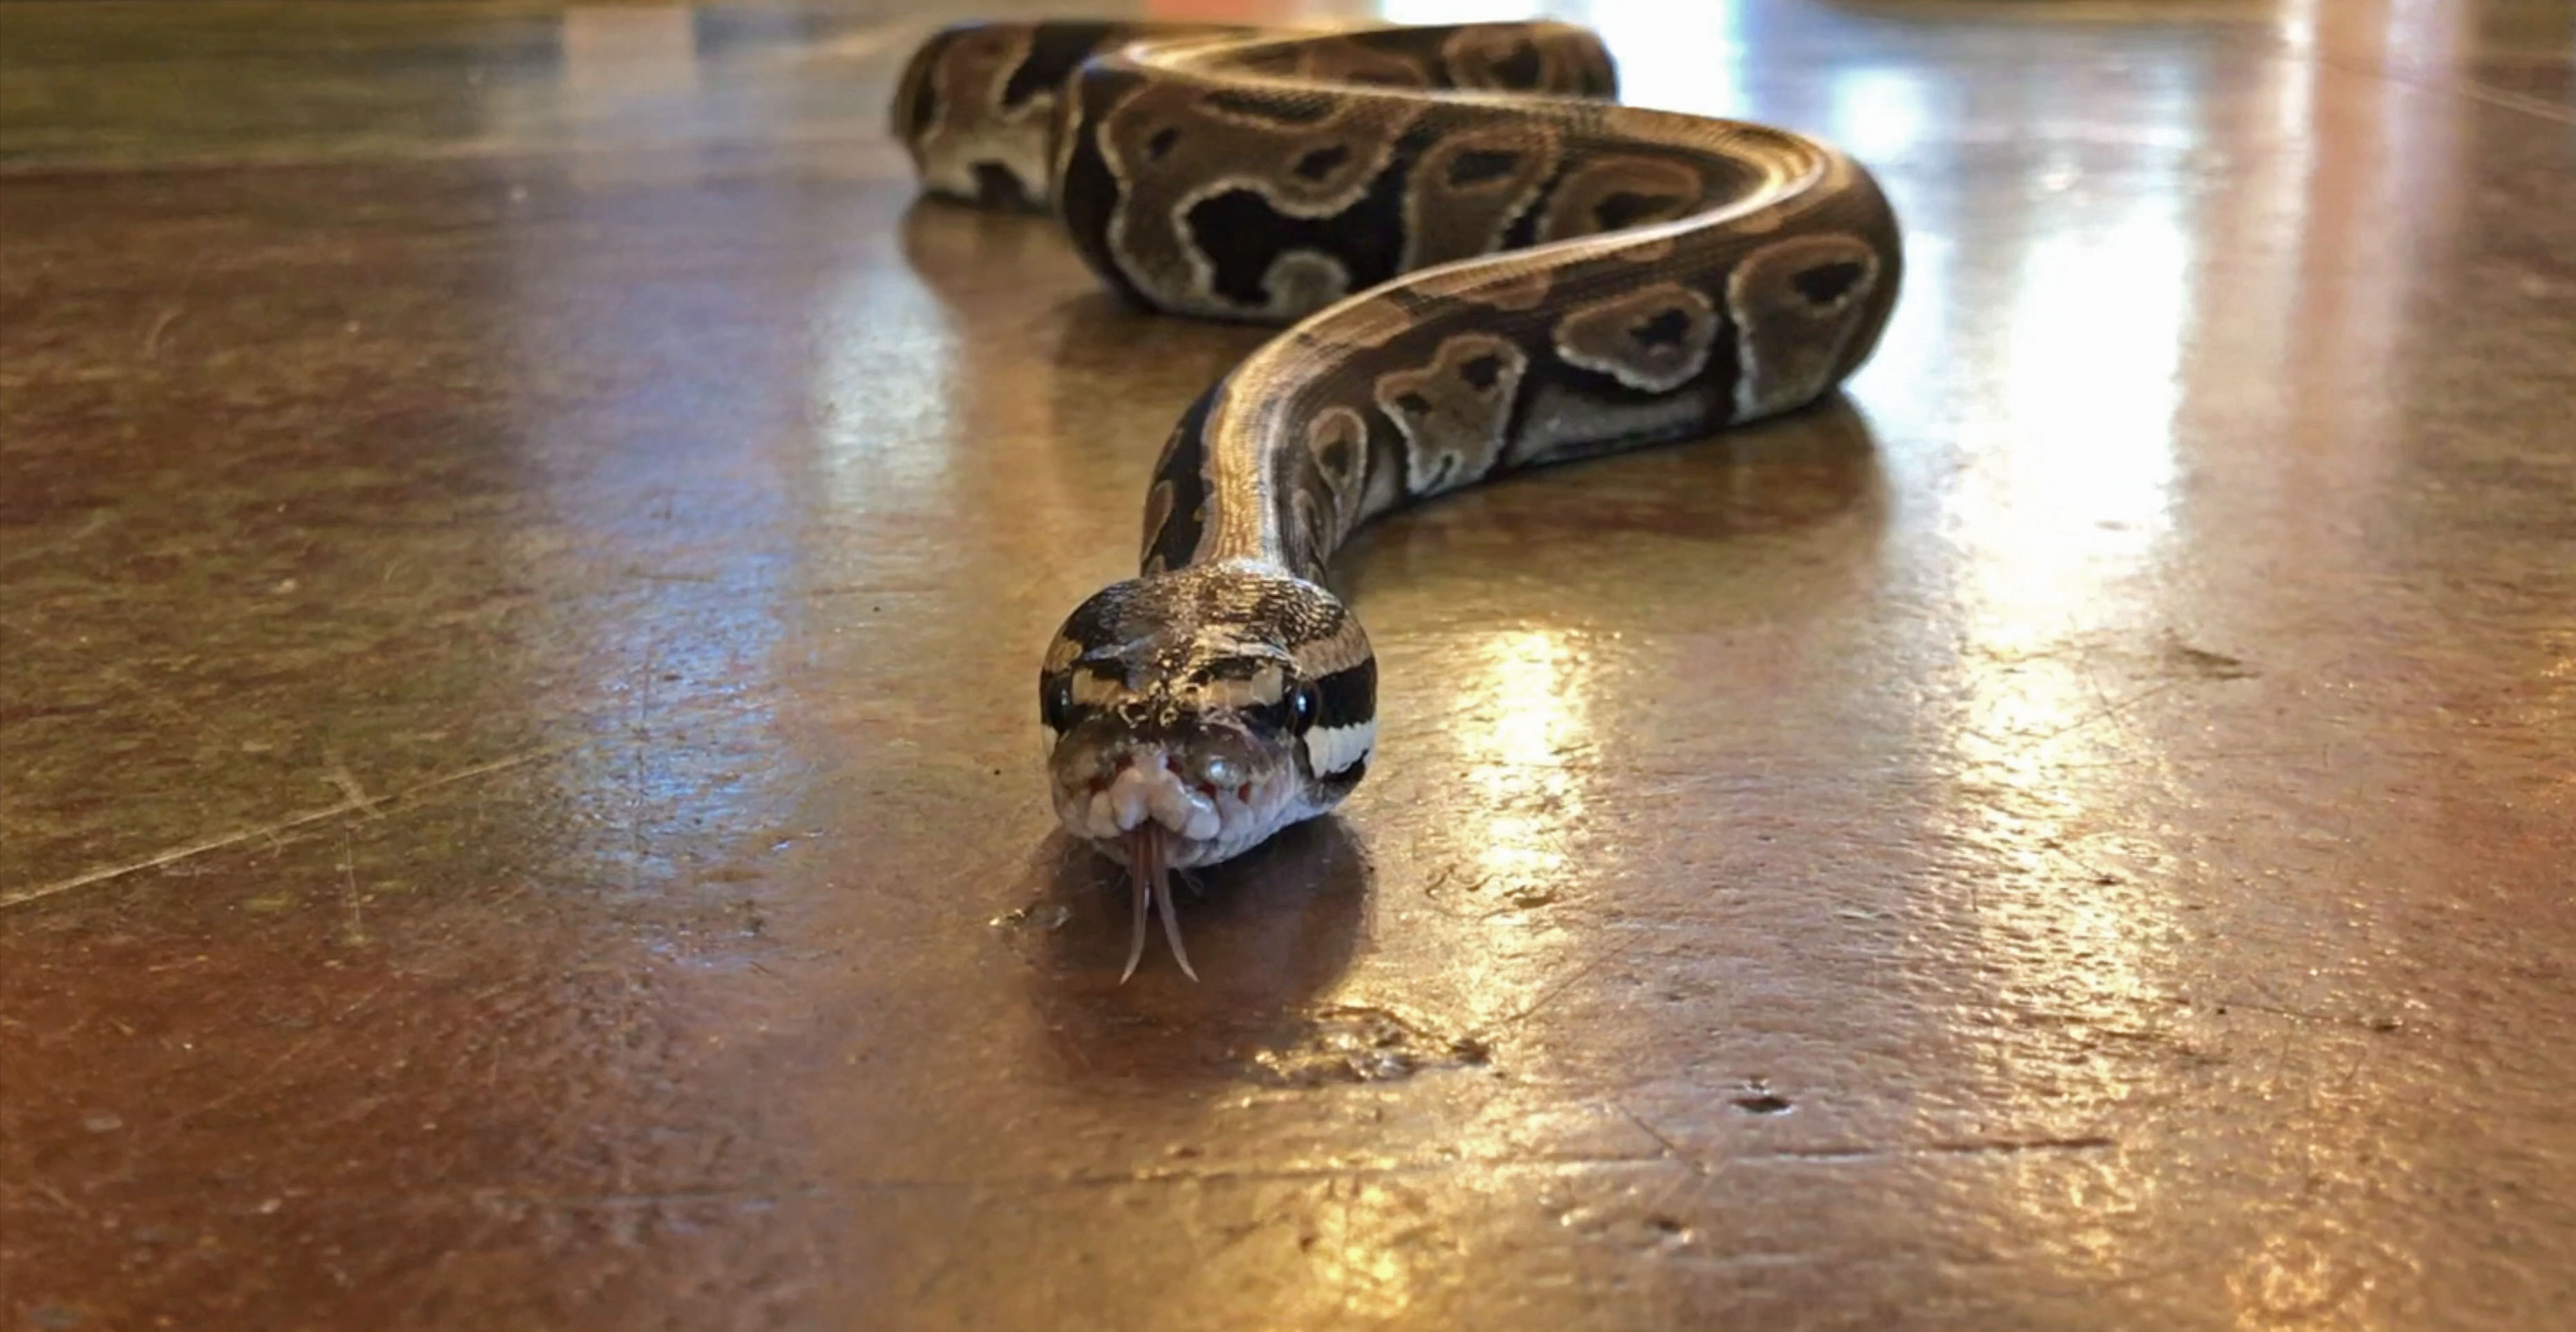 Penny, the ball python, slithering towards the camera.